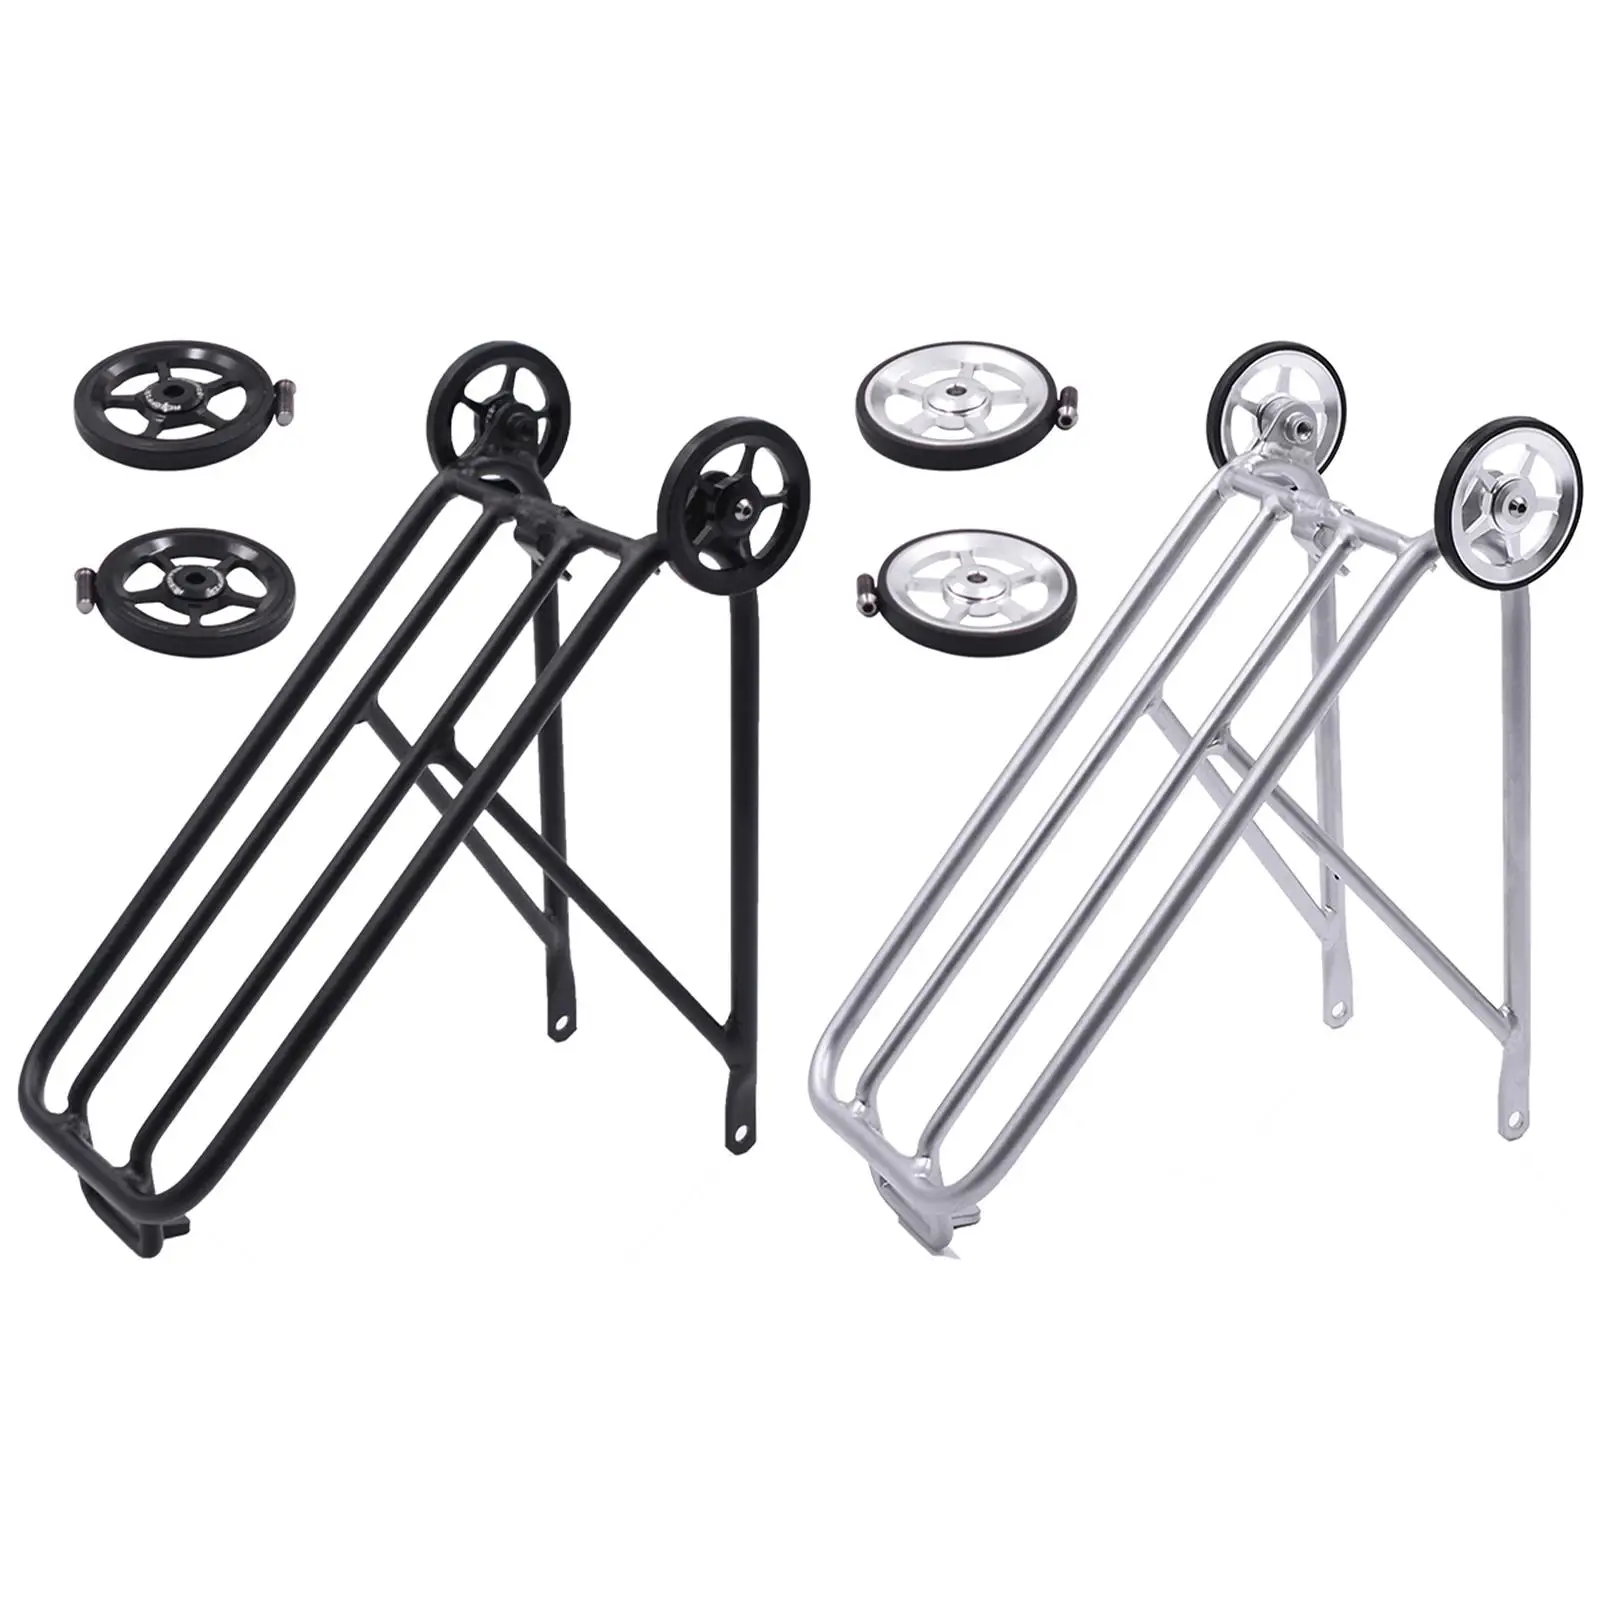 1 Piece Bike Rear Rack Foldable with Easy Wheel Shelf Durable for Week Eight High Strength Bicycle Accessories Lightweight